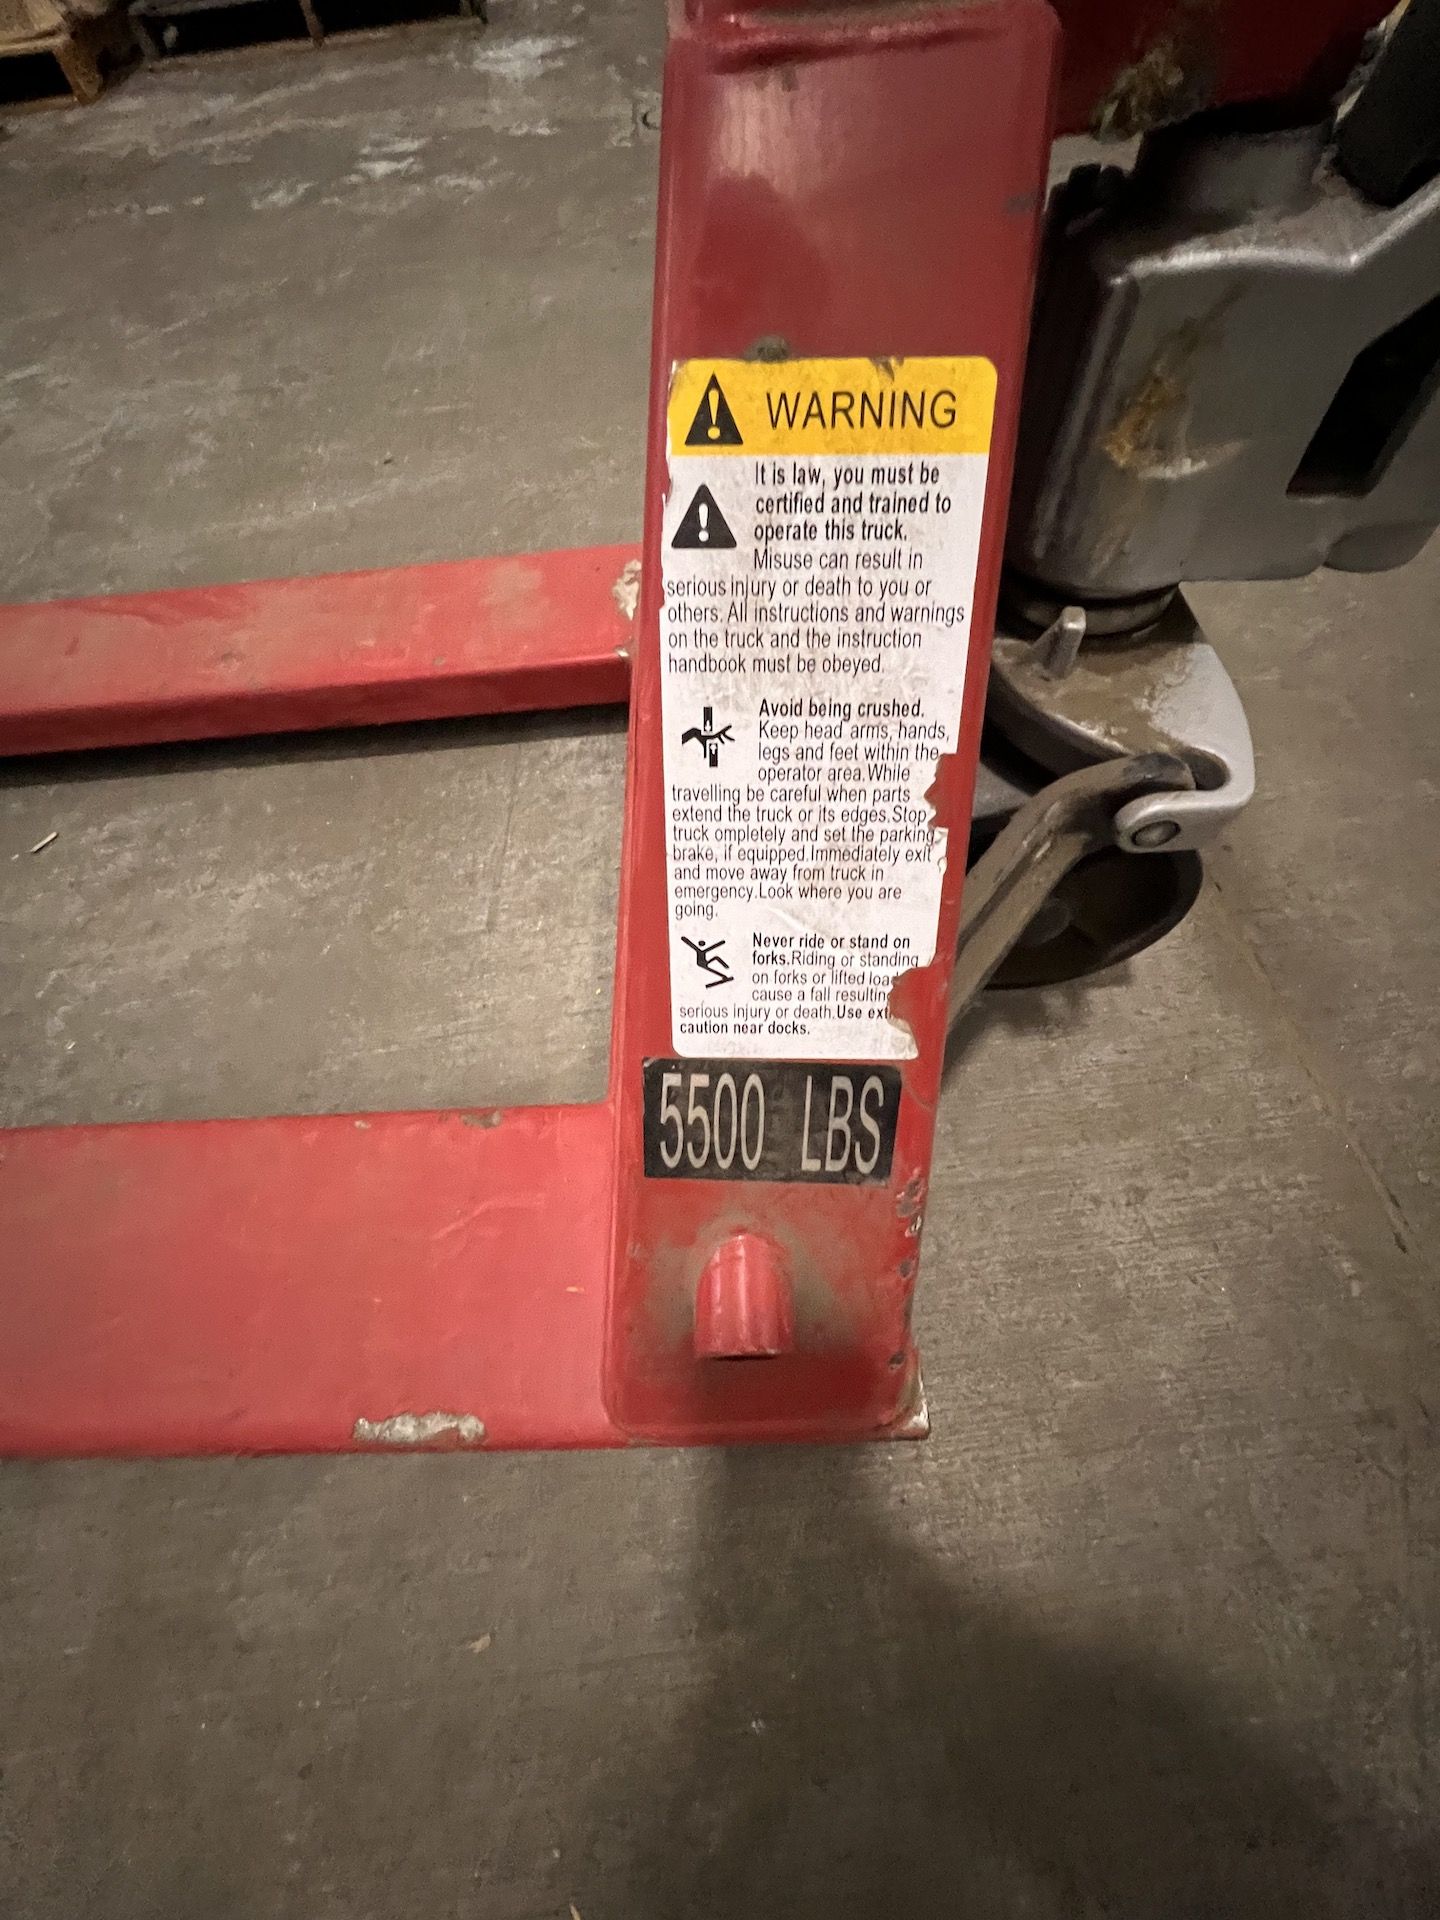 PALLET JACK(RIGGING & SIMPLE LOADING FEE $10.00) (NOTE: DOES NOT INCLUDE SKIDDING OR PACKAGING WILL - Image 3 of 3